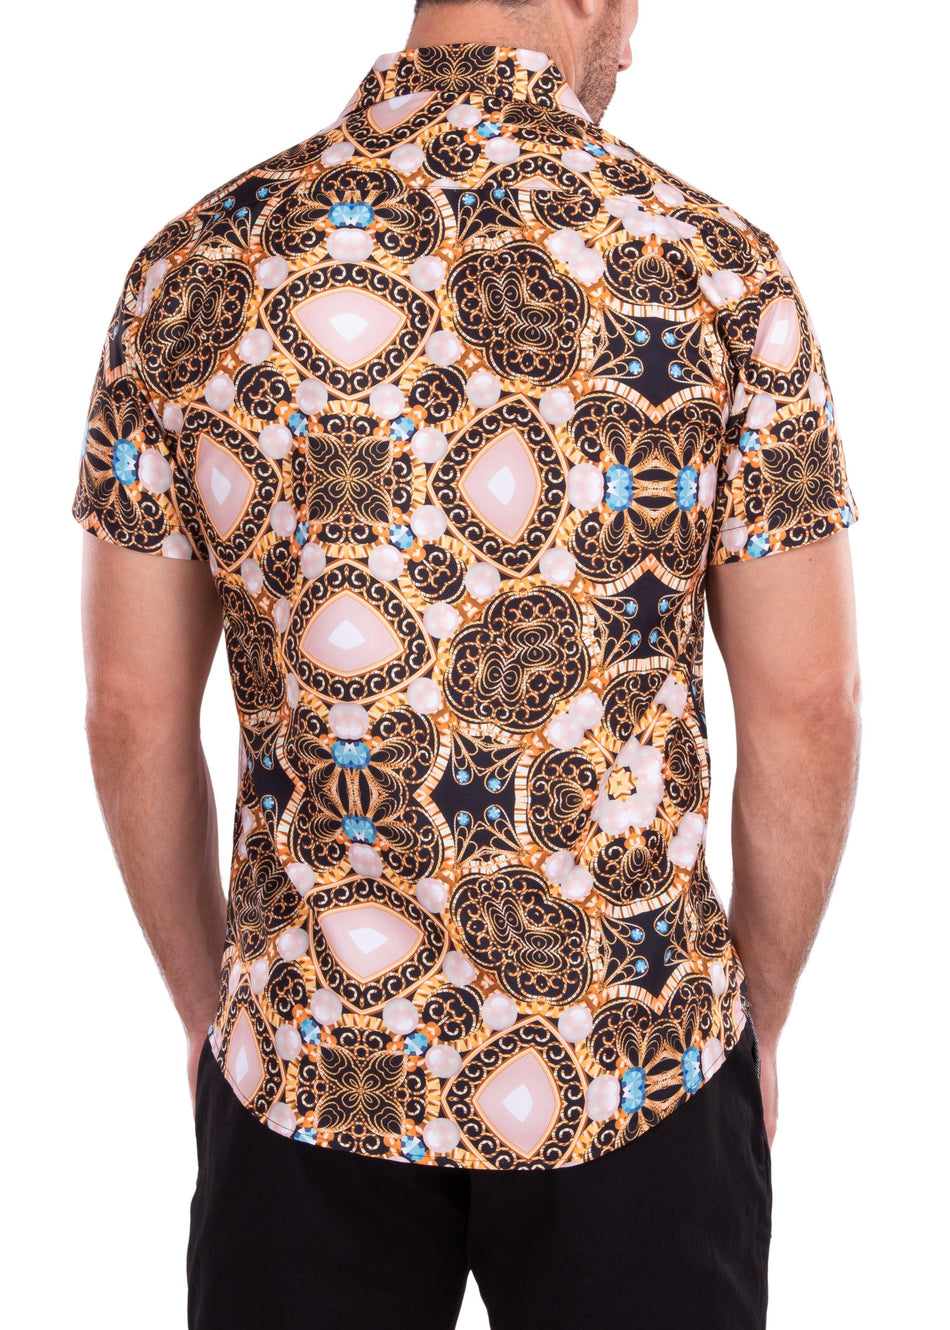 Psychedelic Treasure Chest Print White Button Up Short Sleeve Dress Shirt